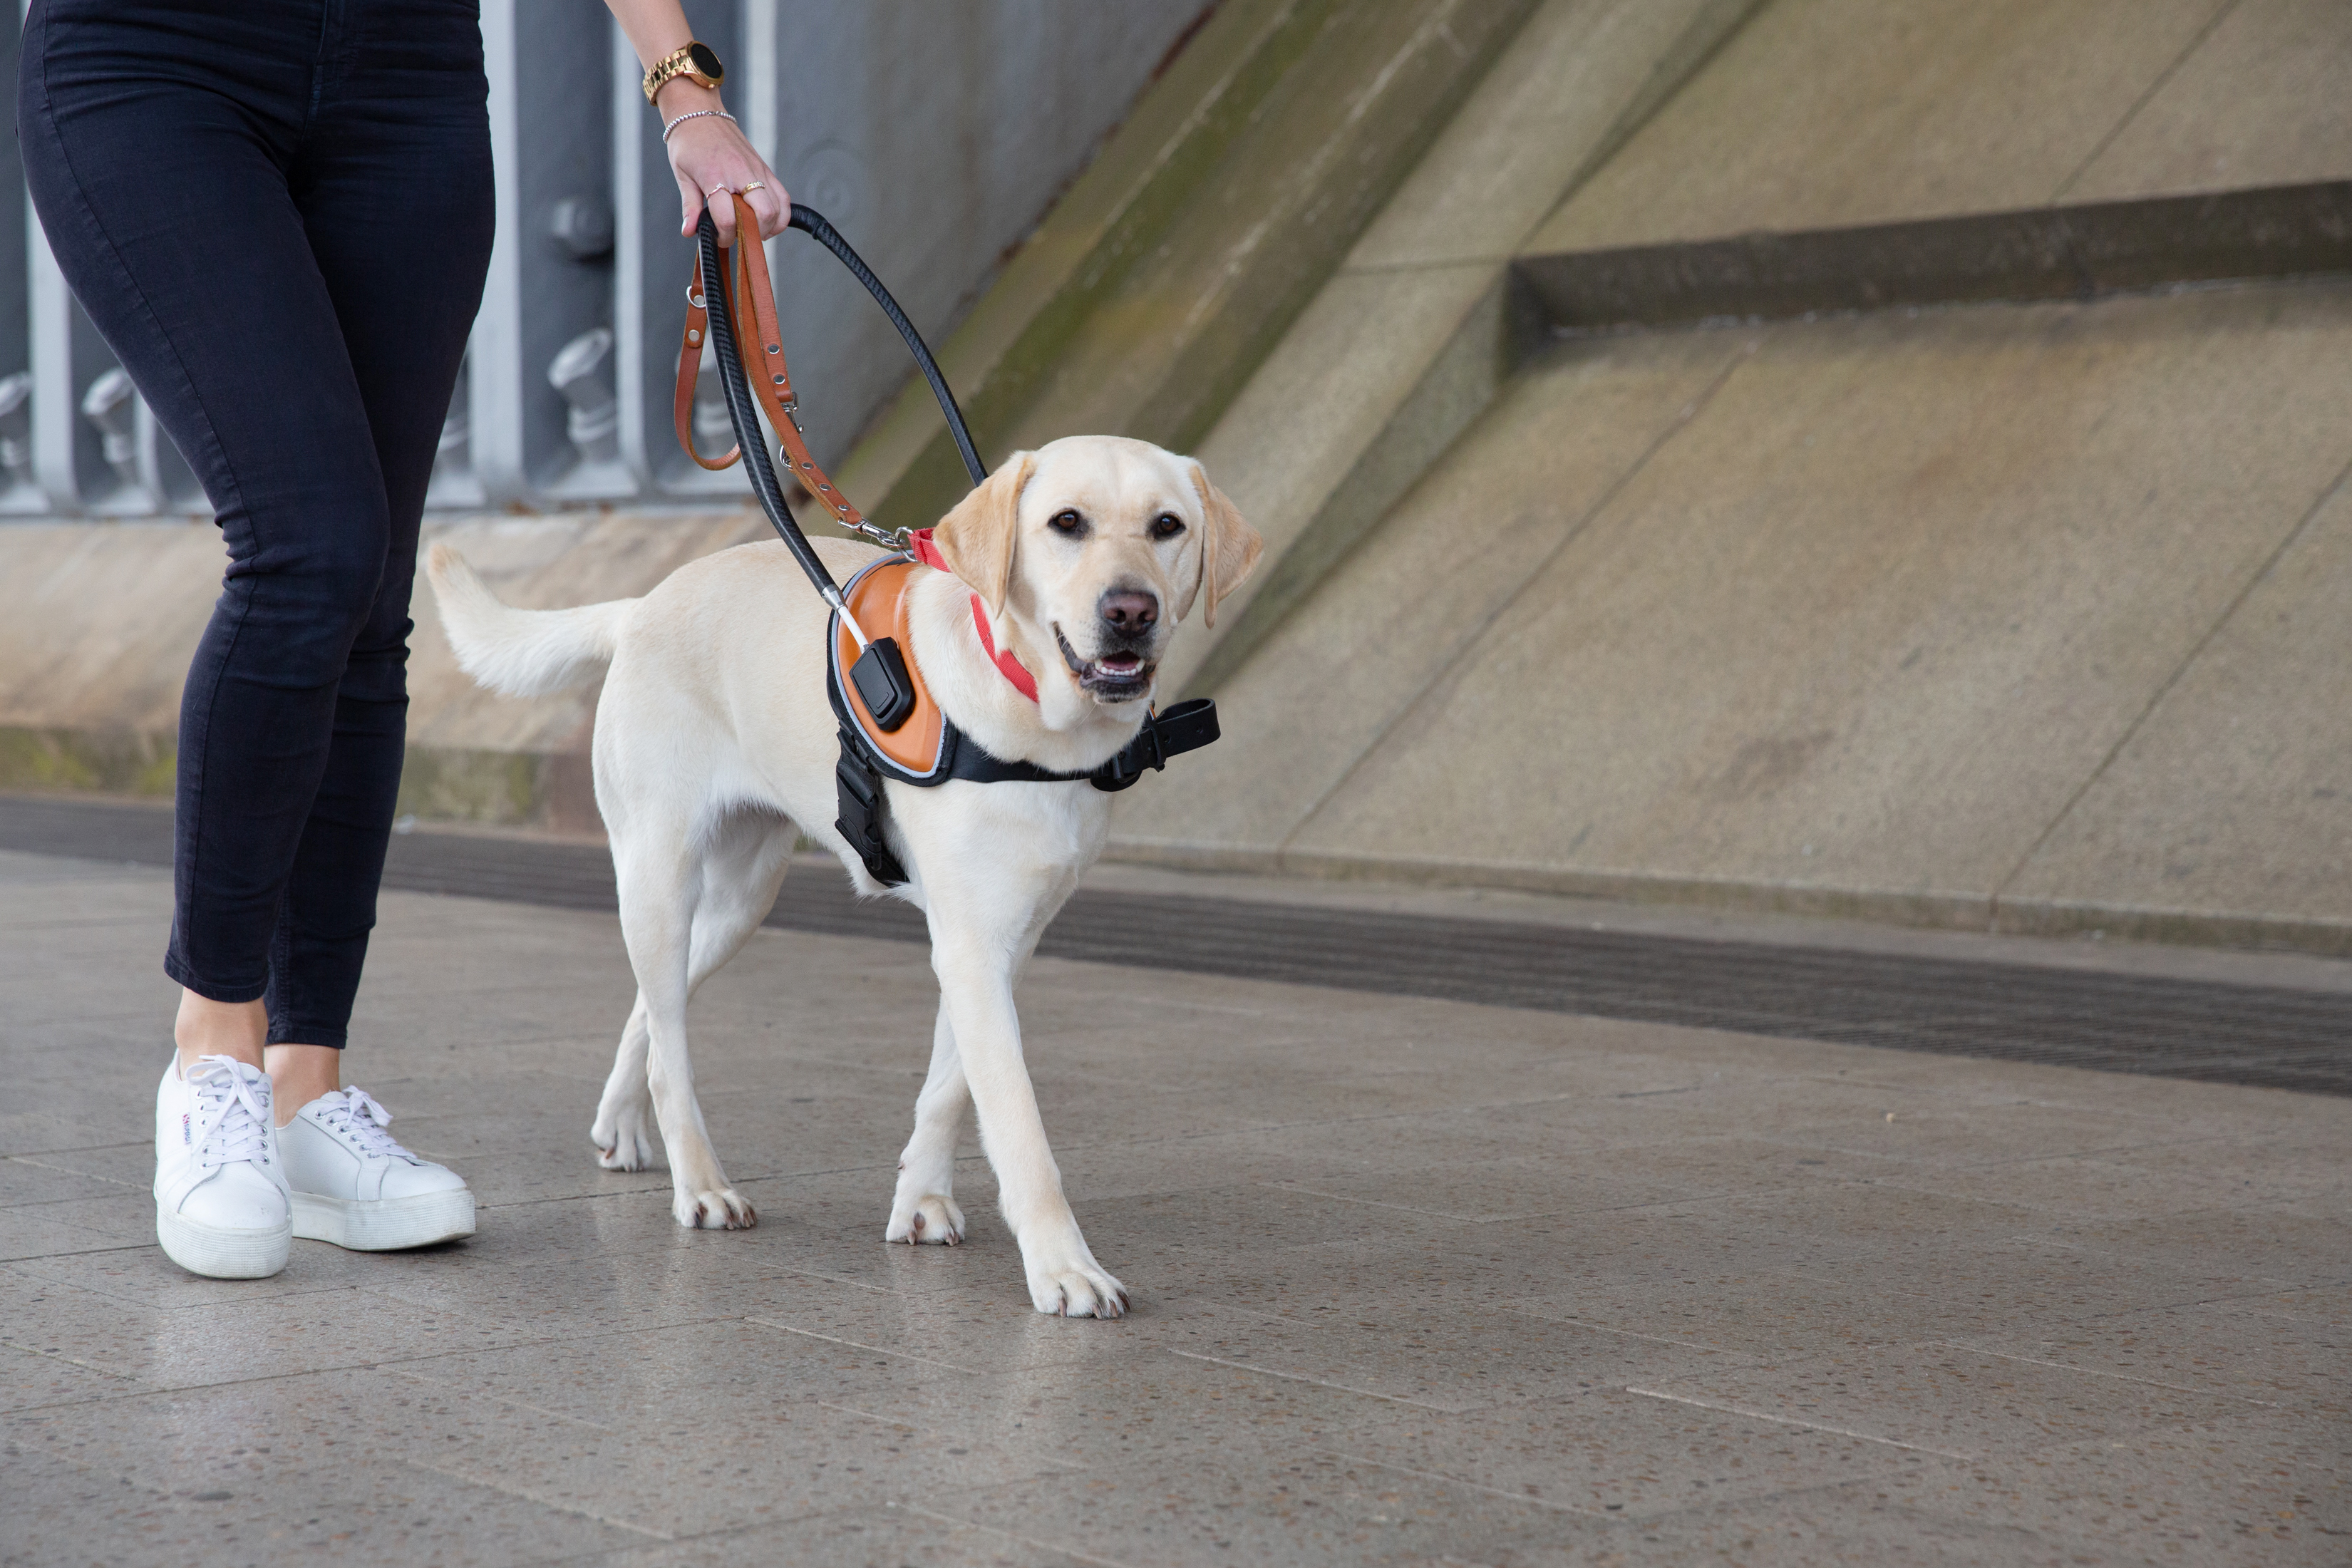 A Guide Dog walking with a harness